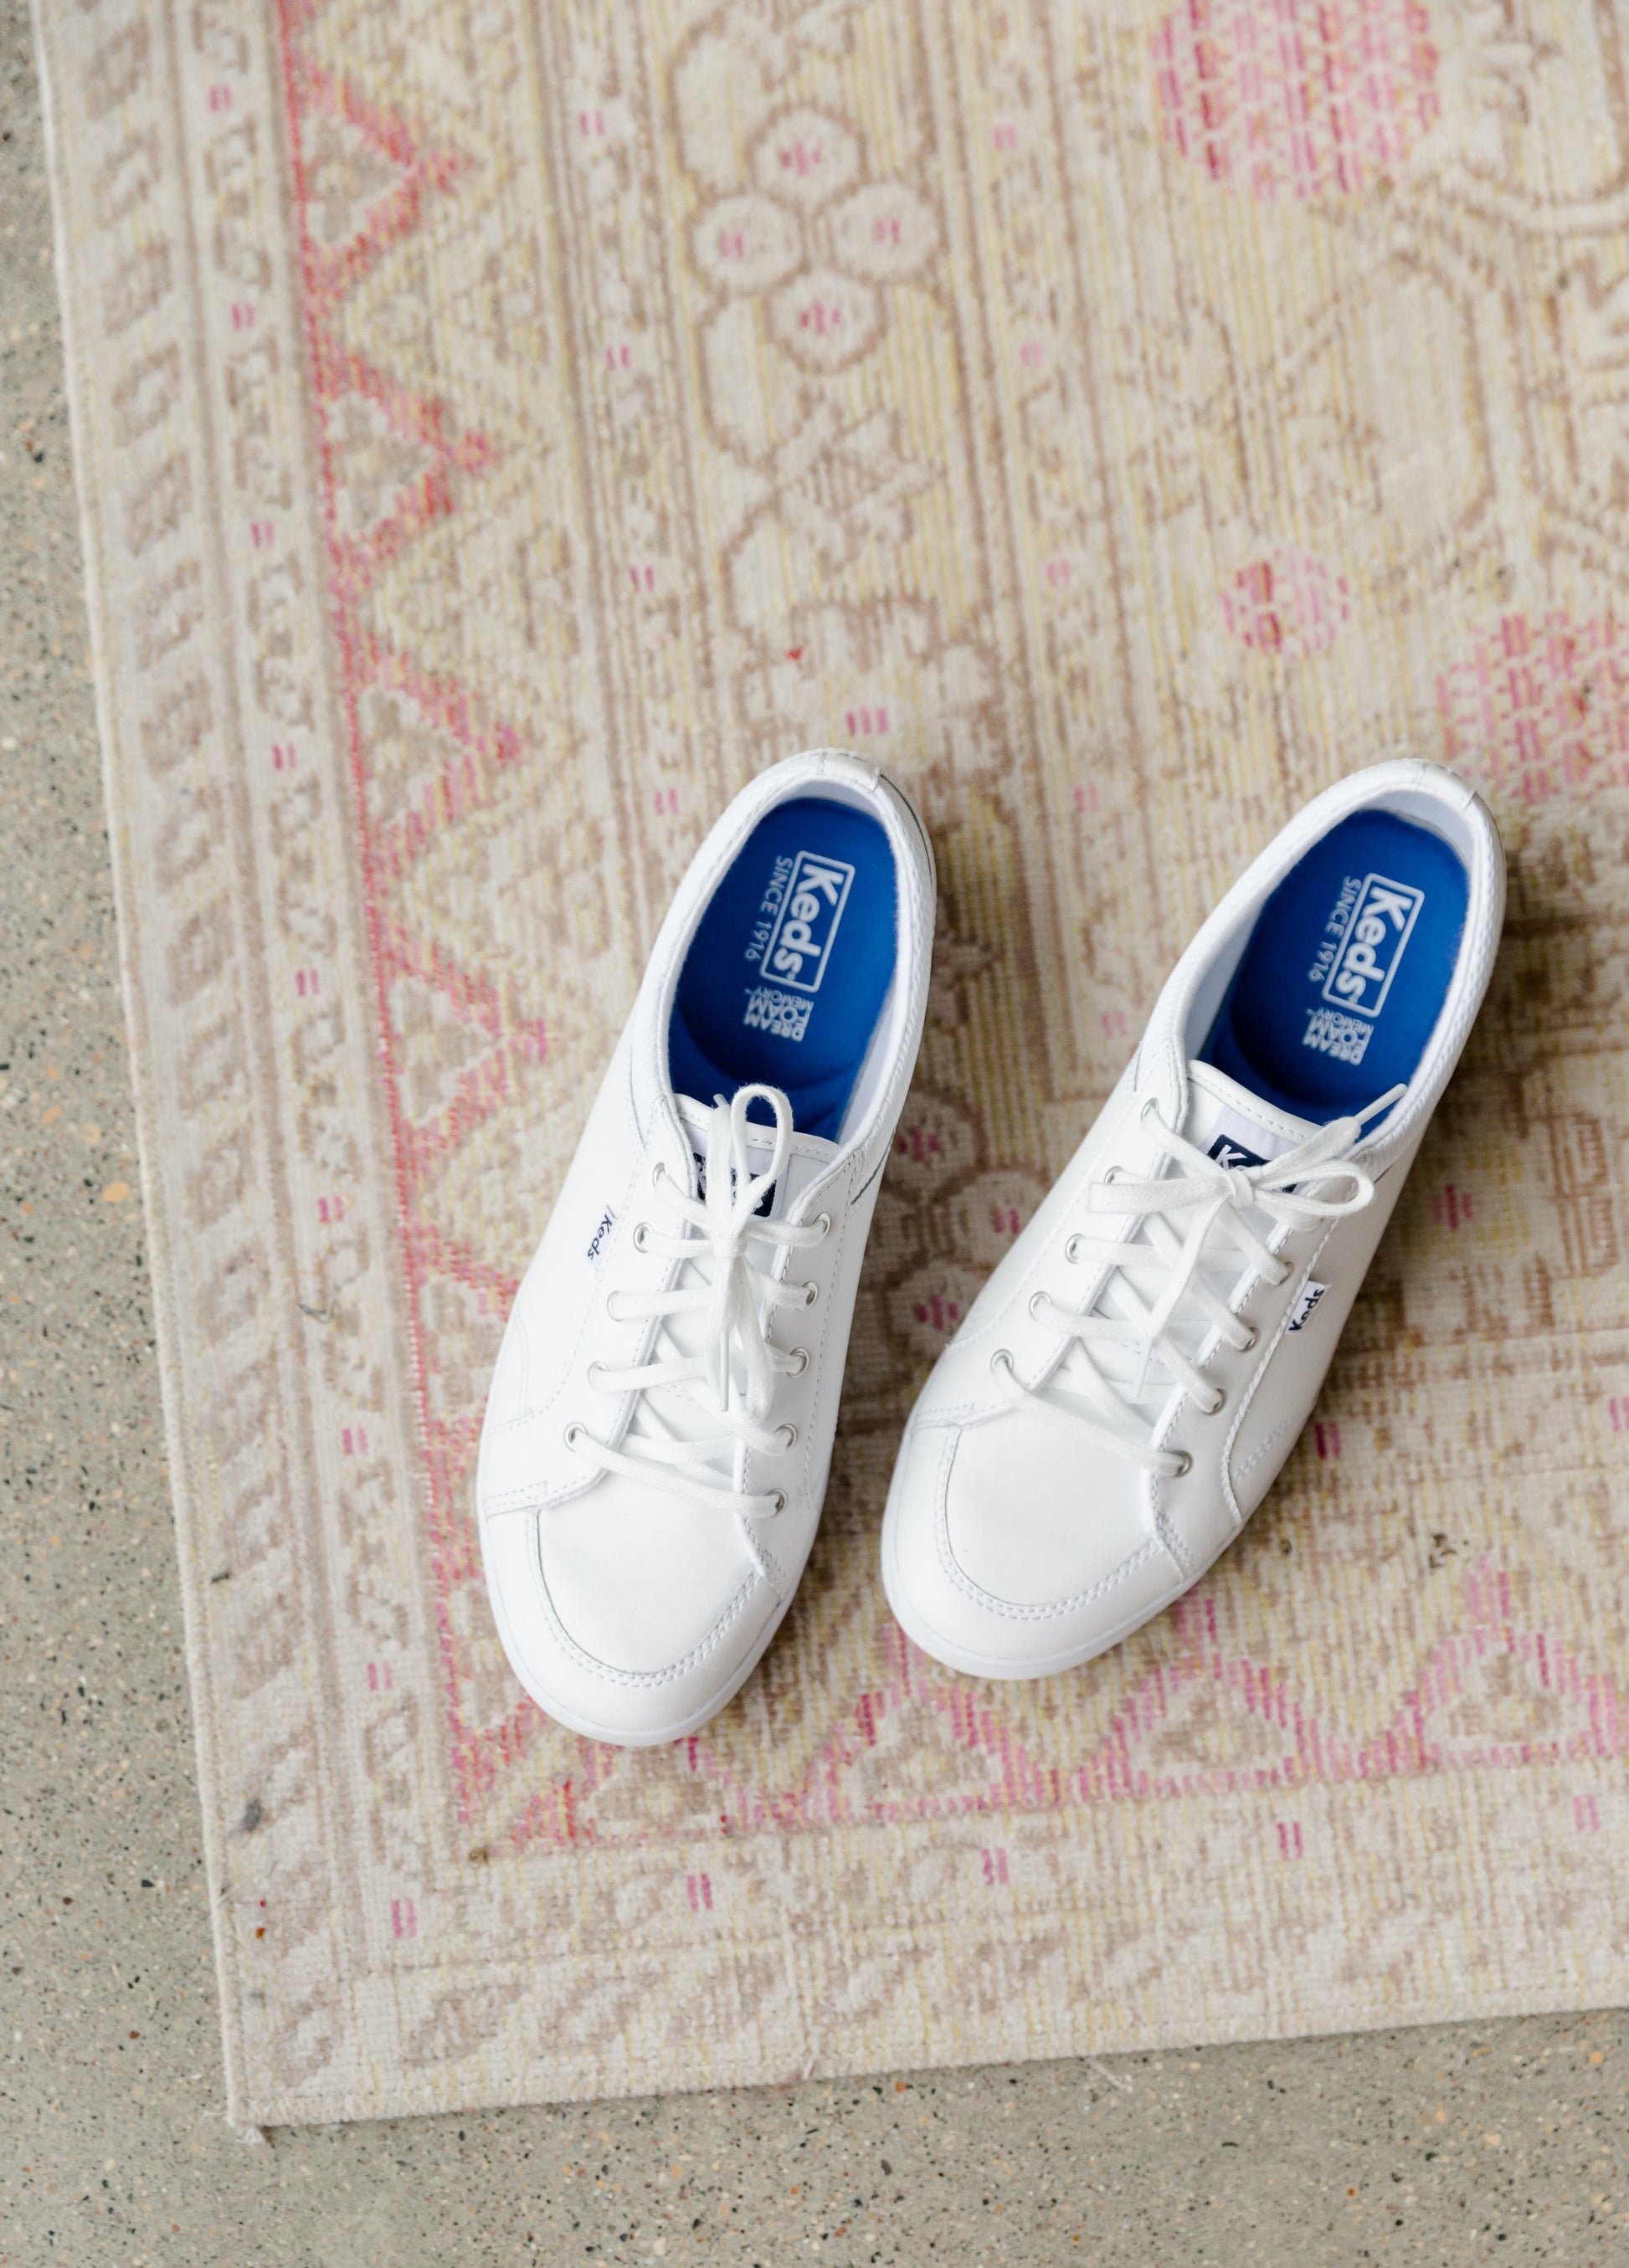 Keds White Center Leather Sneakers Shoes